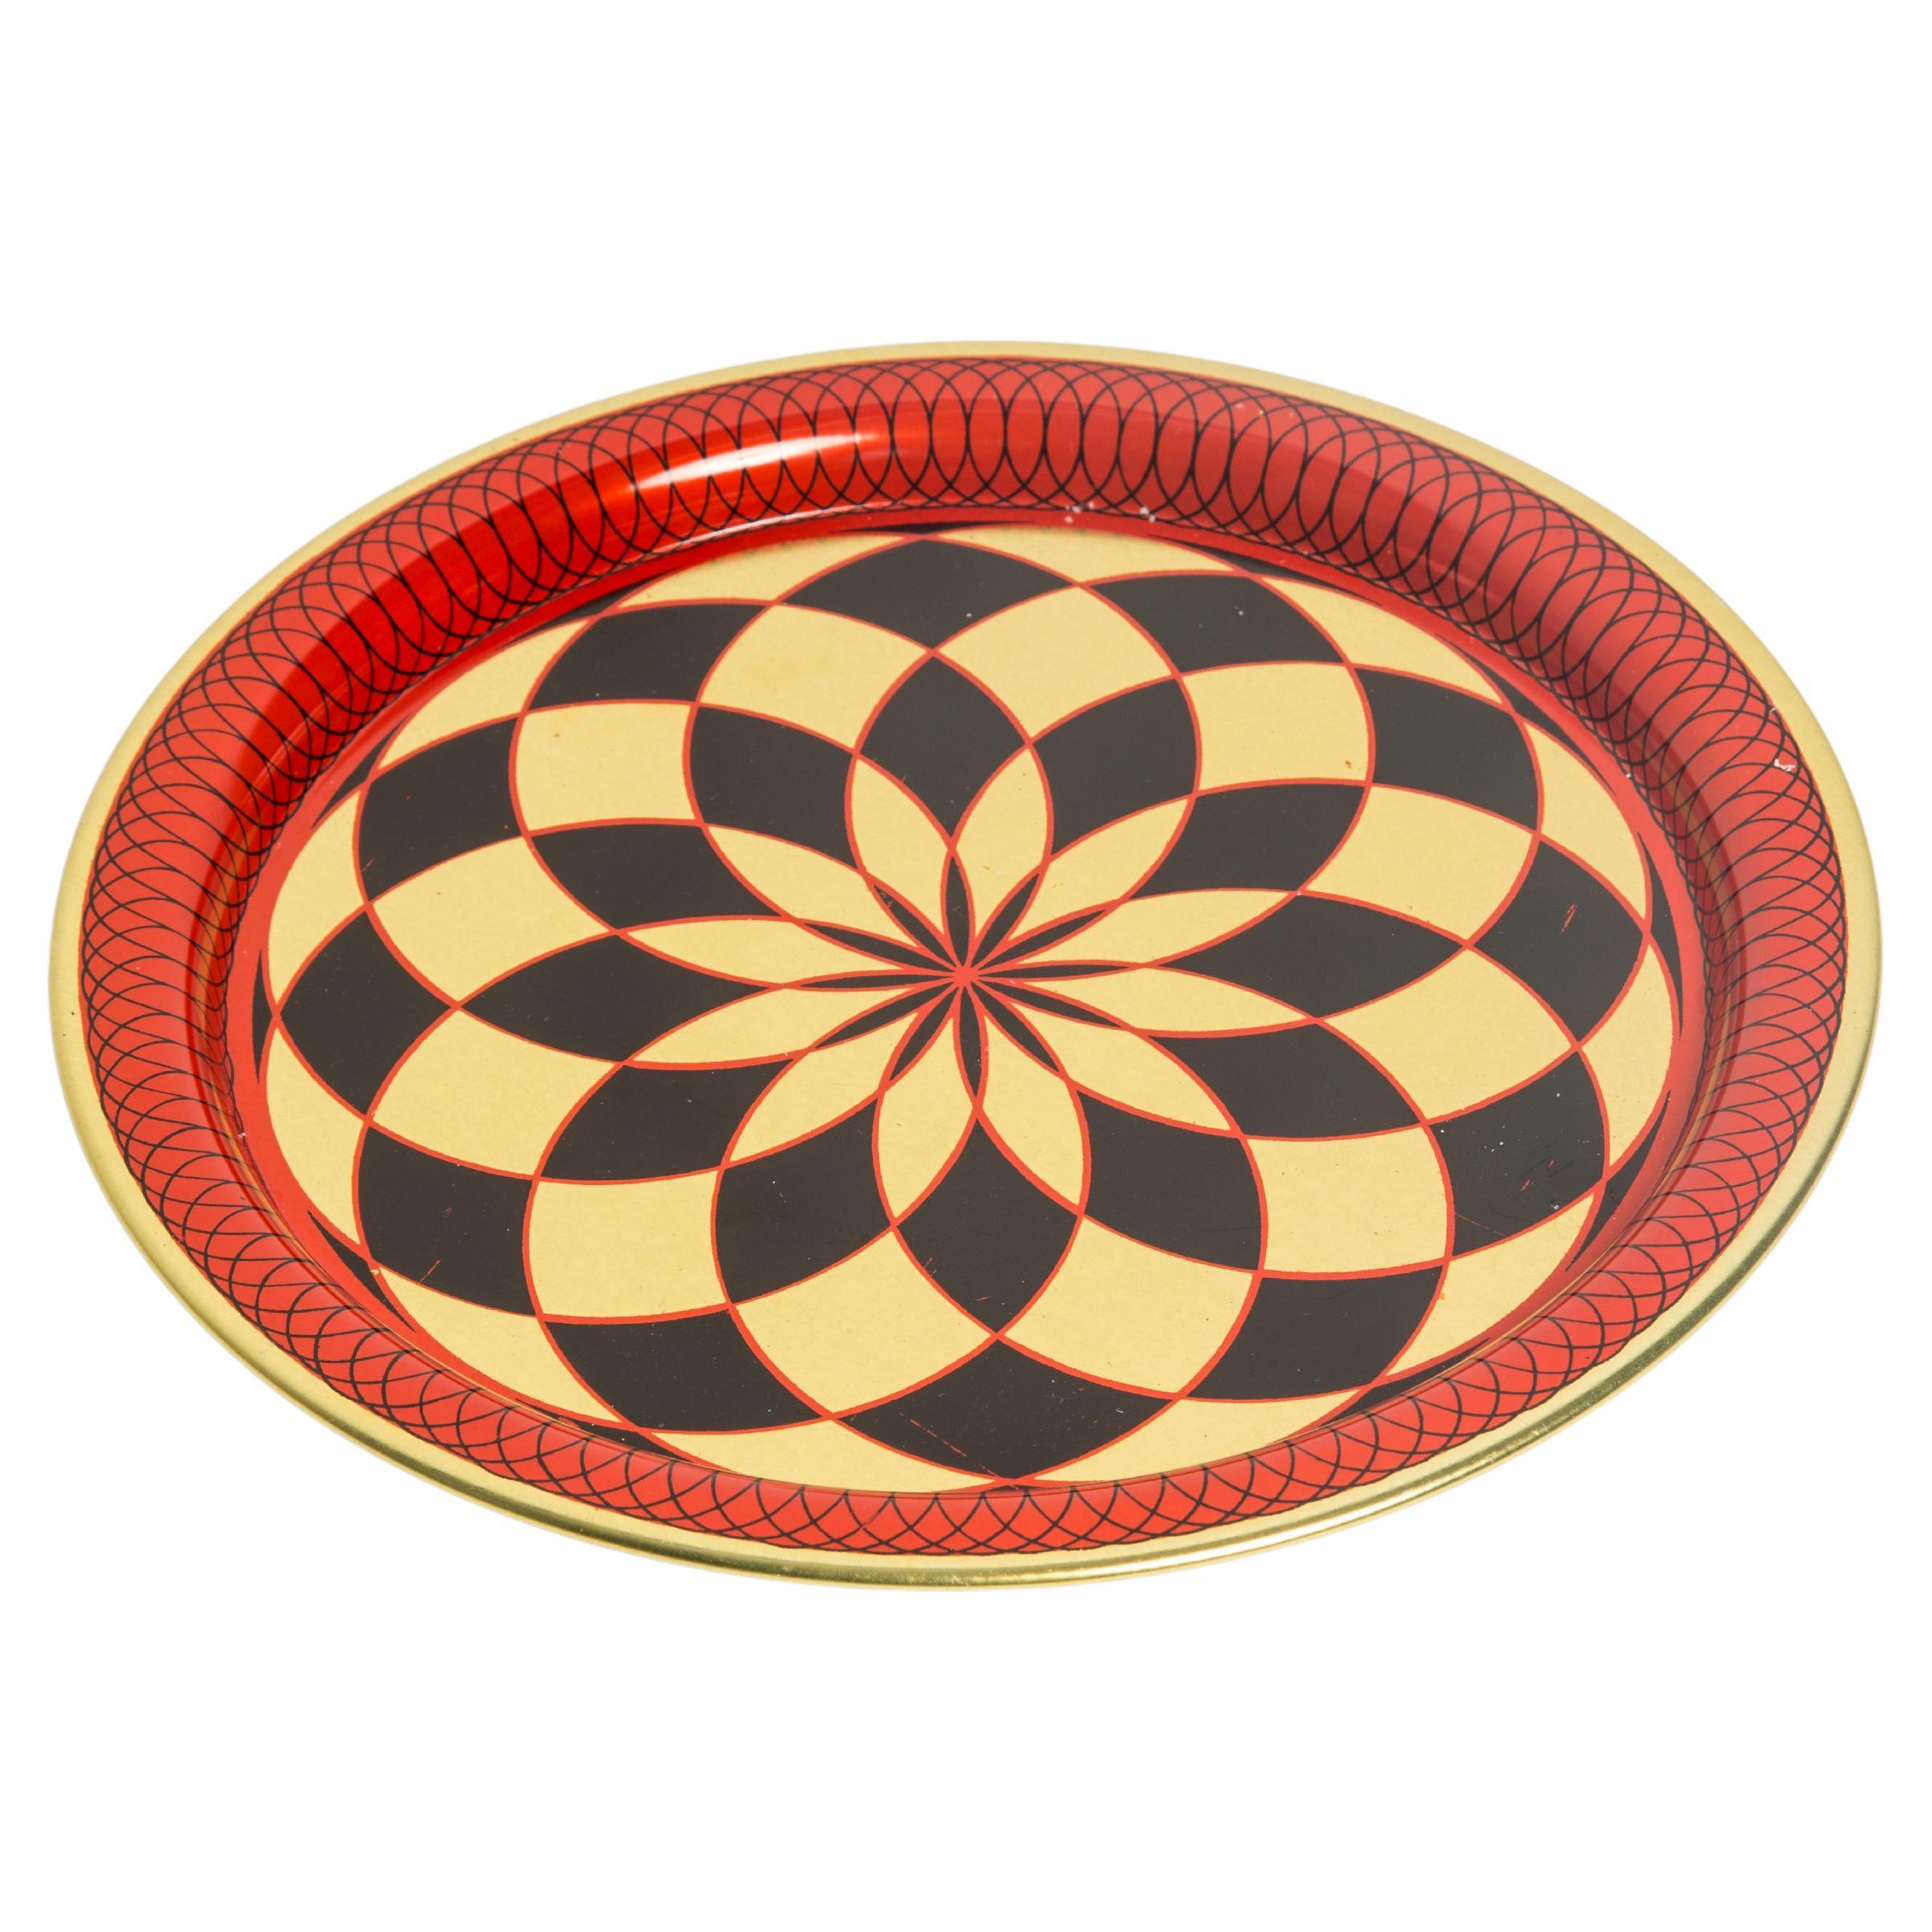 Midcentury Vintage Red Black and Gold Decorative Metal Plate, Poland, 1960s